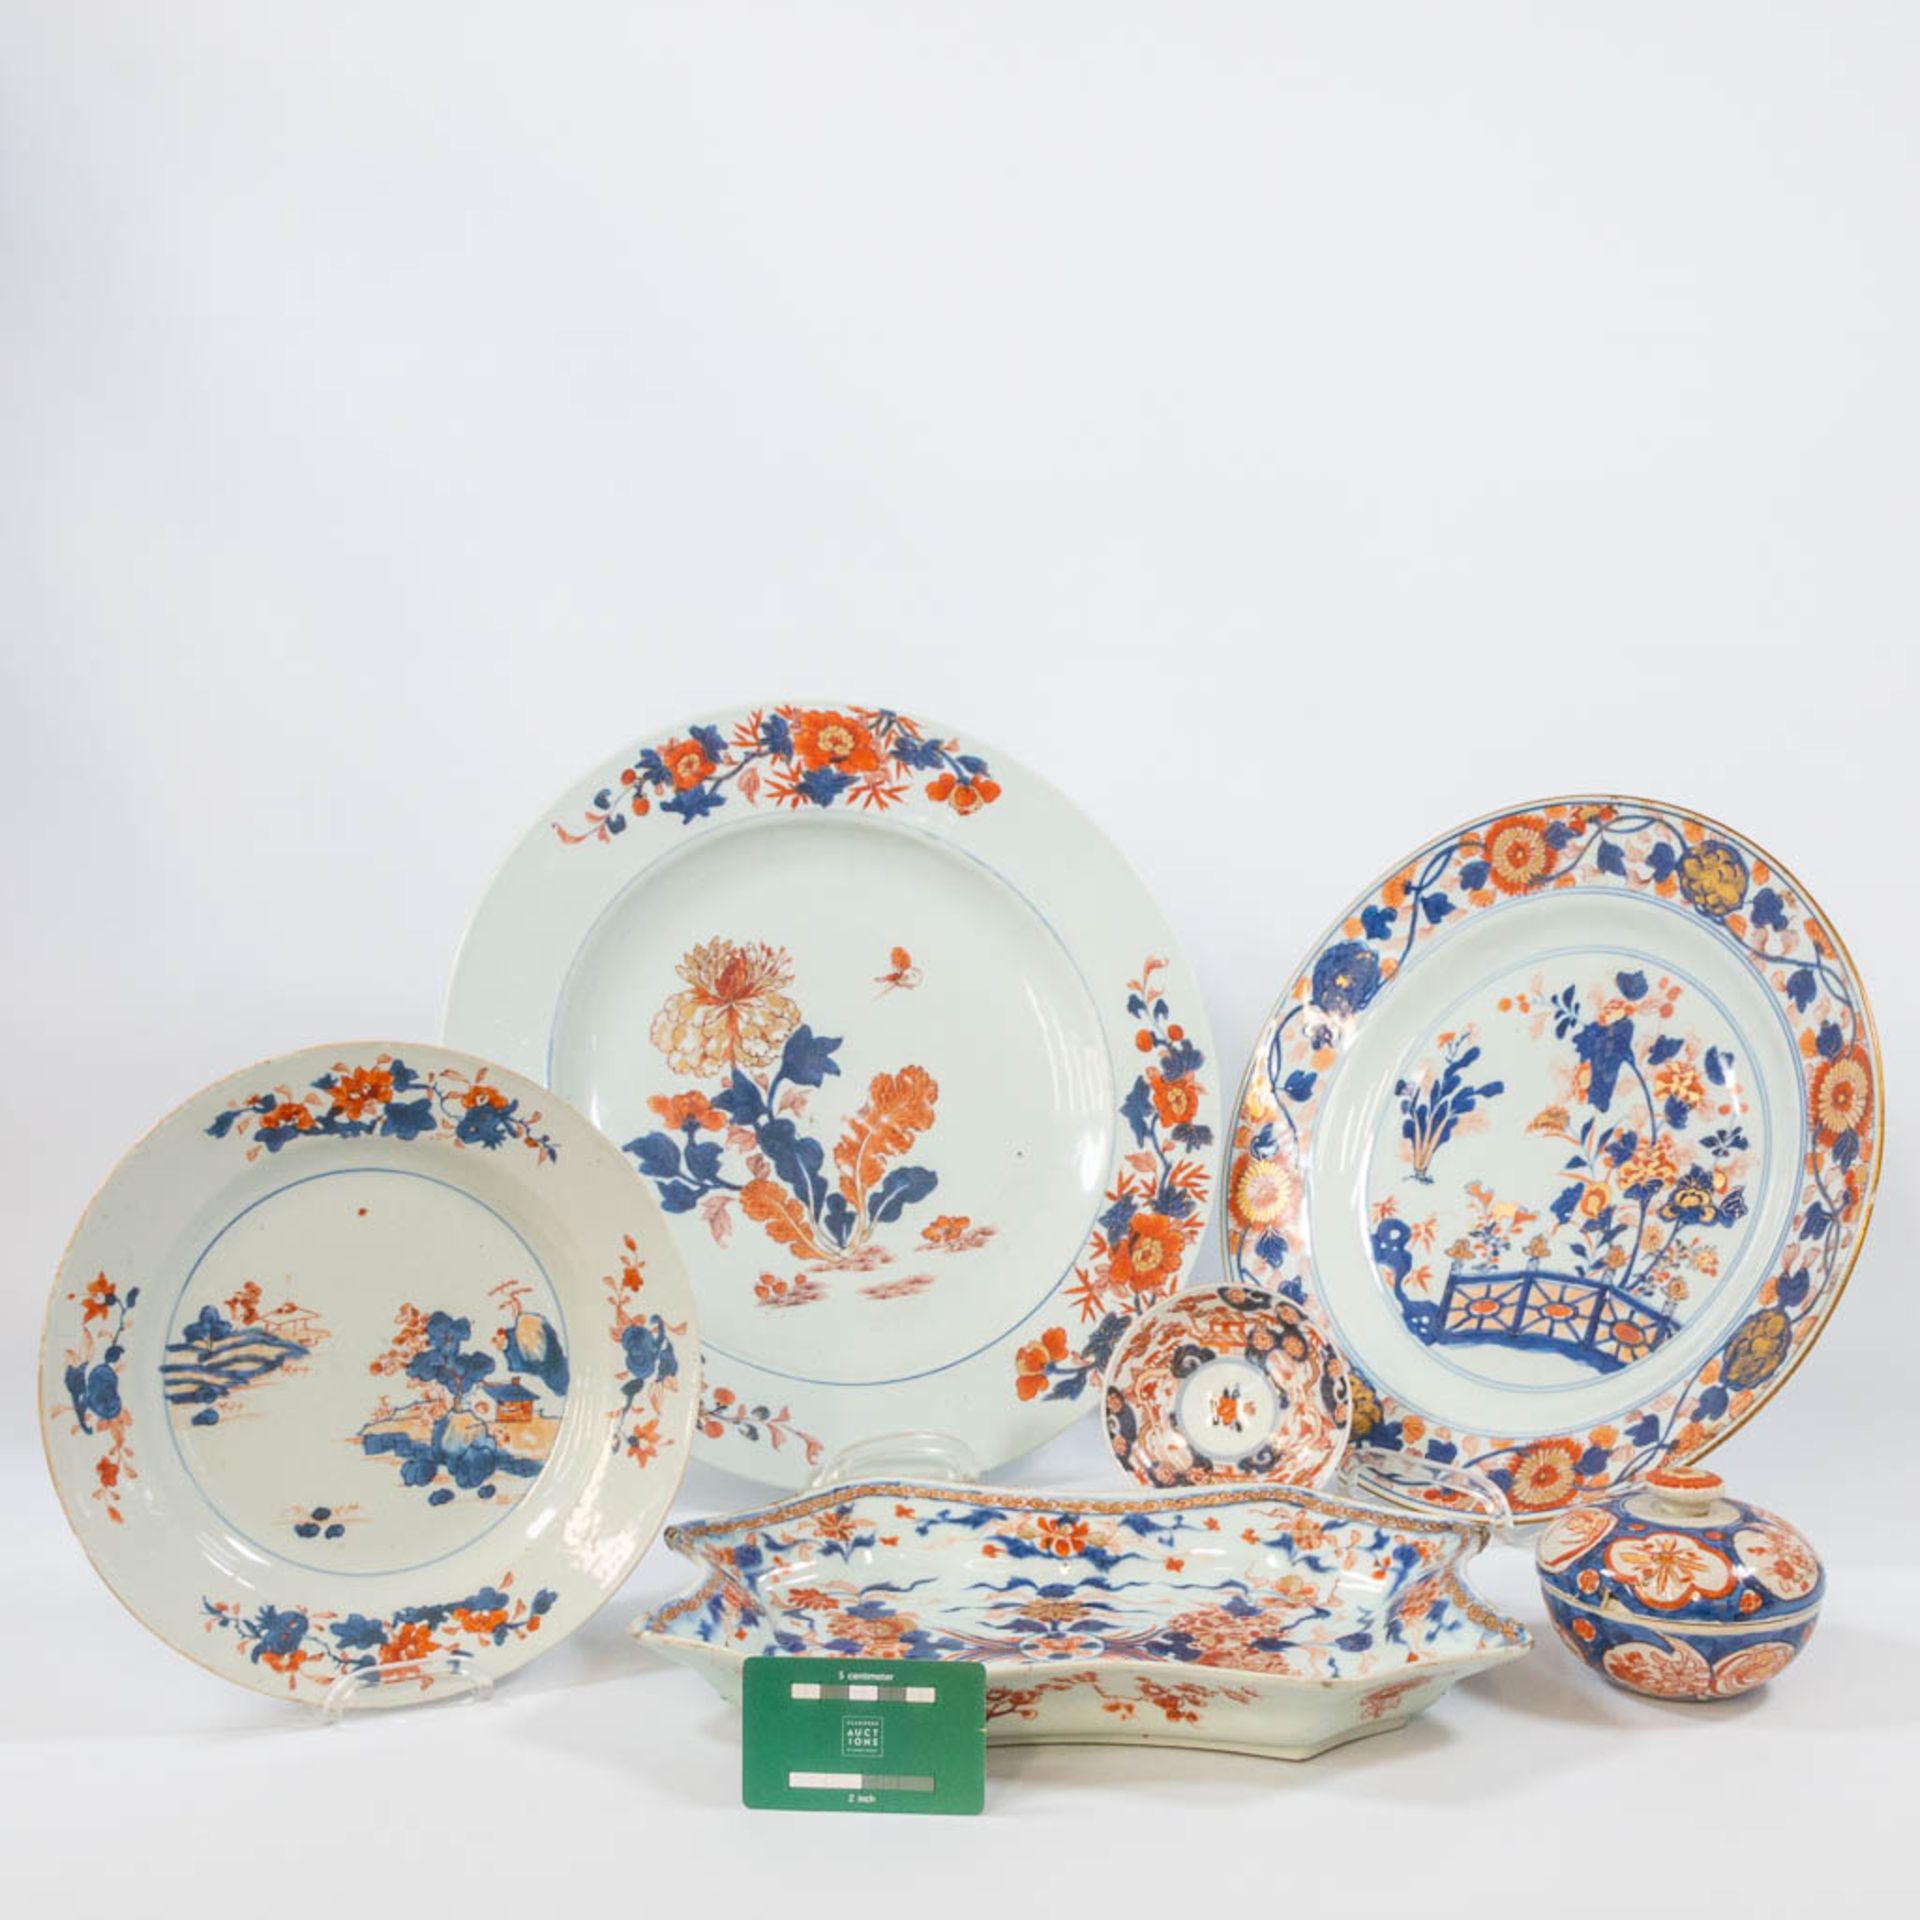 A collection of 6 famille rose objects and plates, made of porcelain. - Image 7 of 24